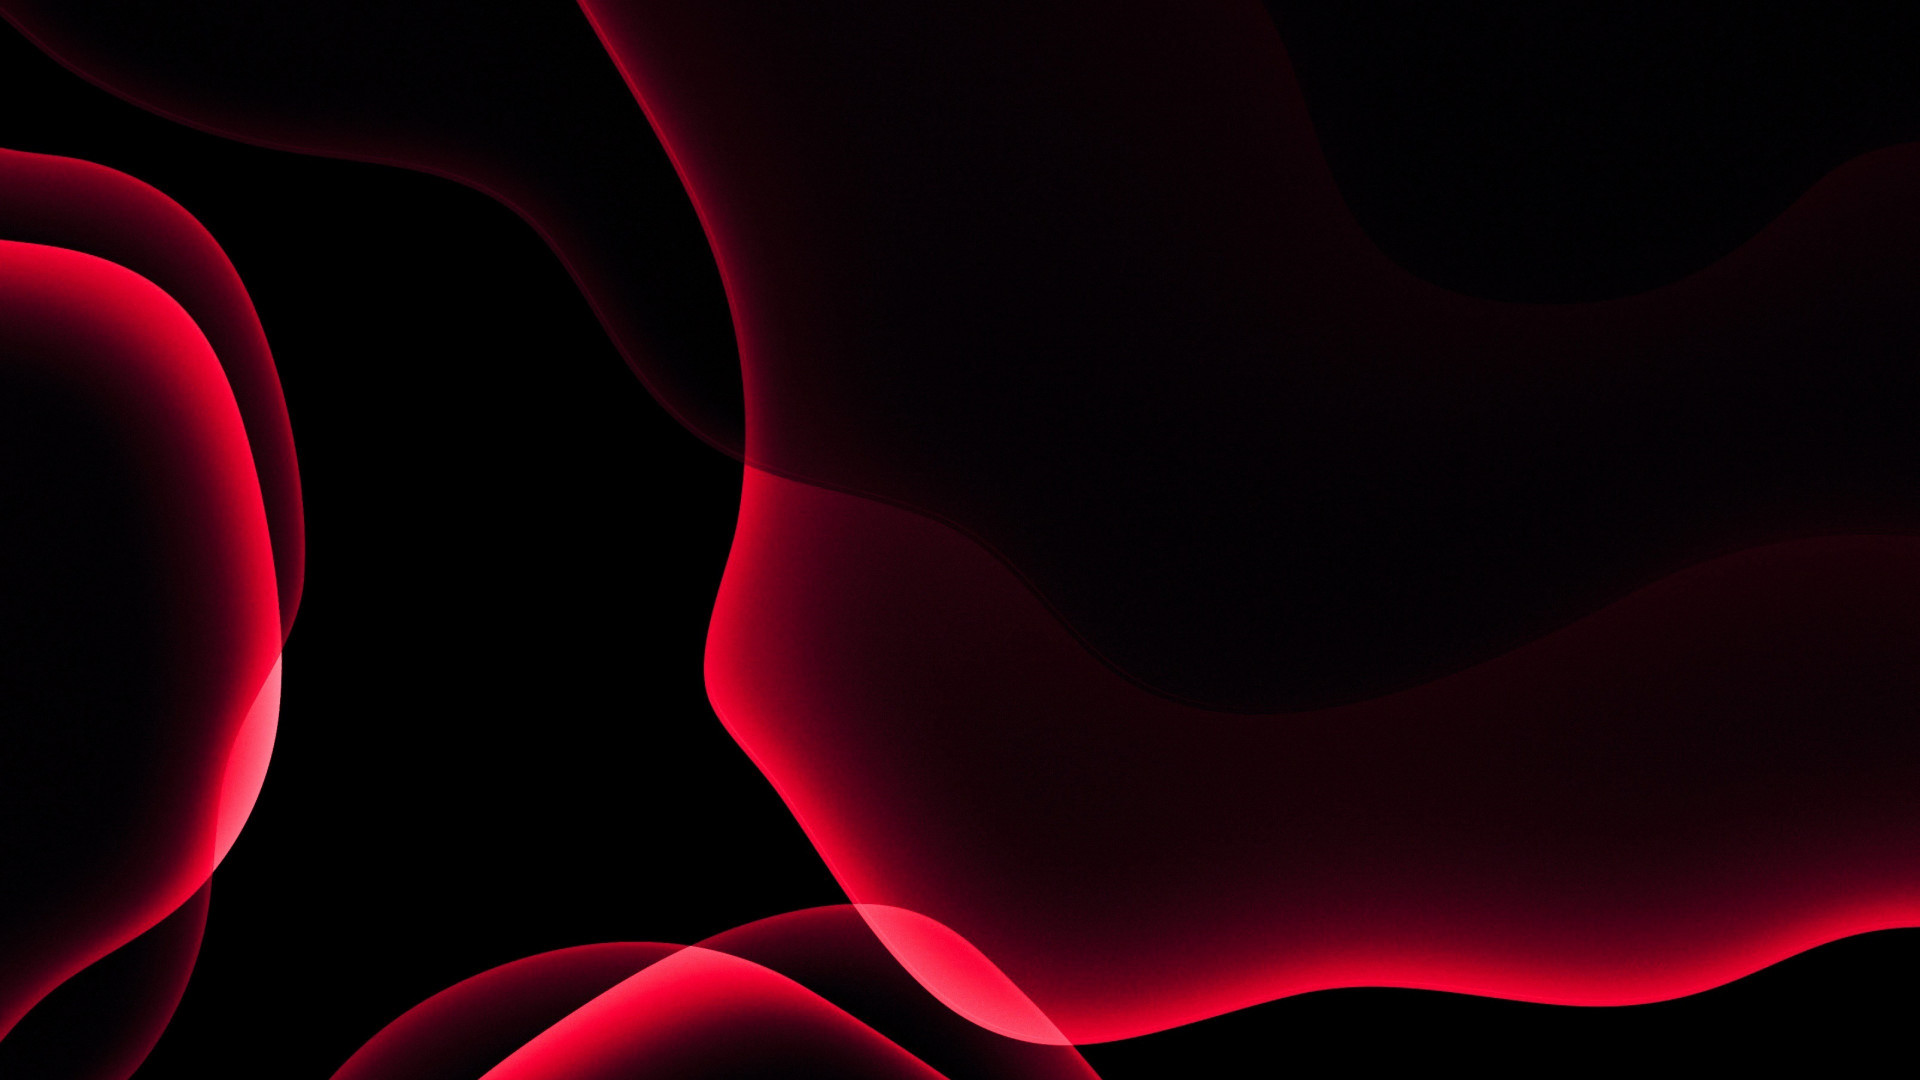 iOS 13 red abstract wallpaper 1920x1080